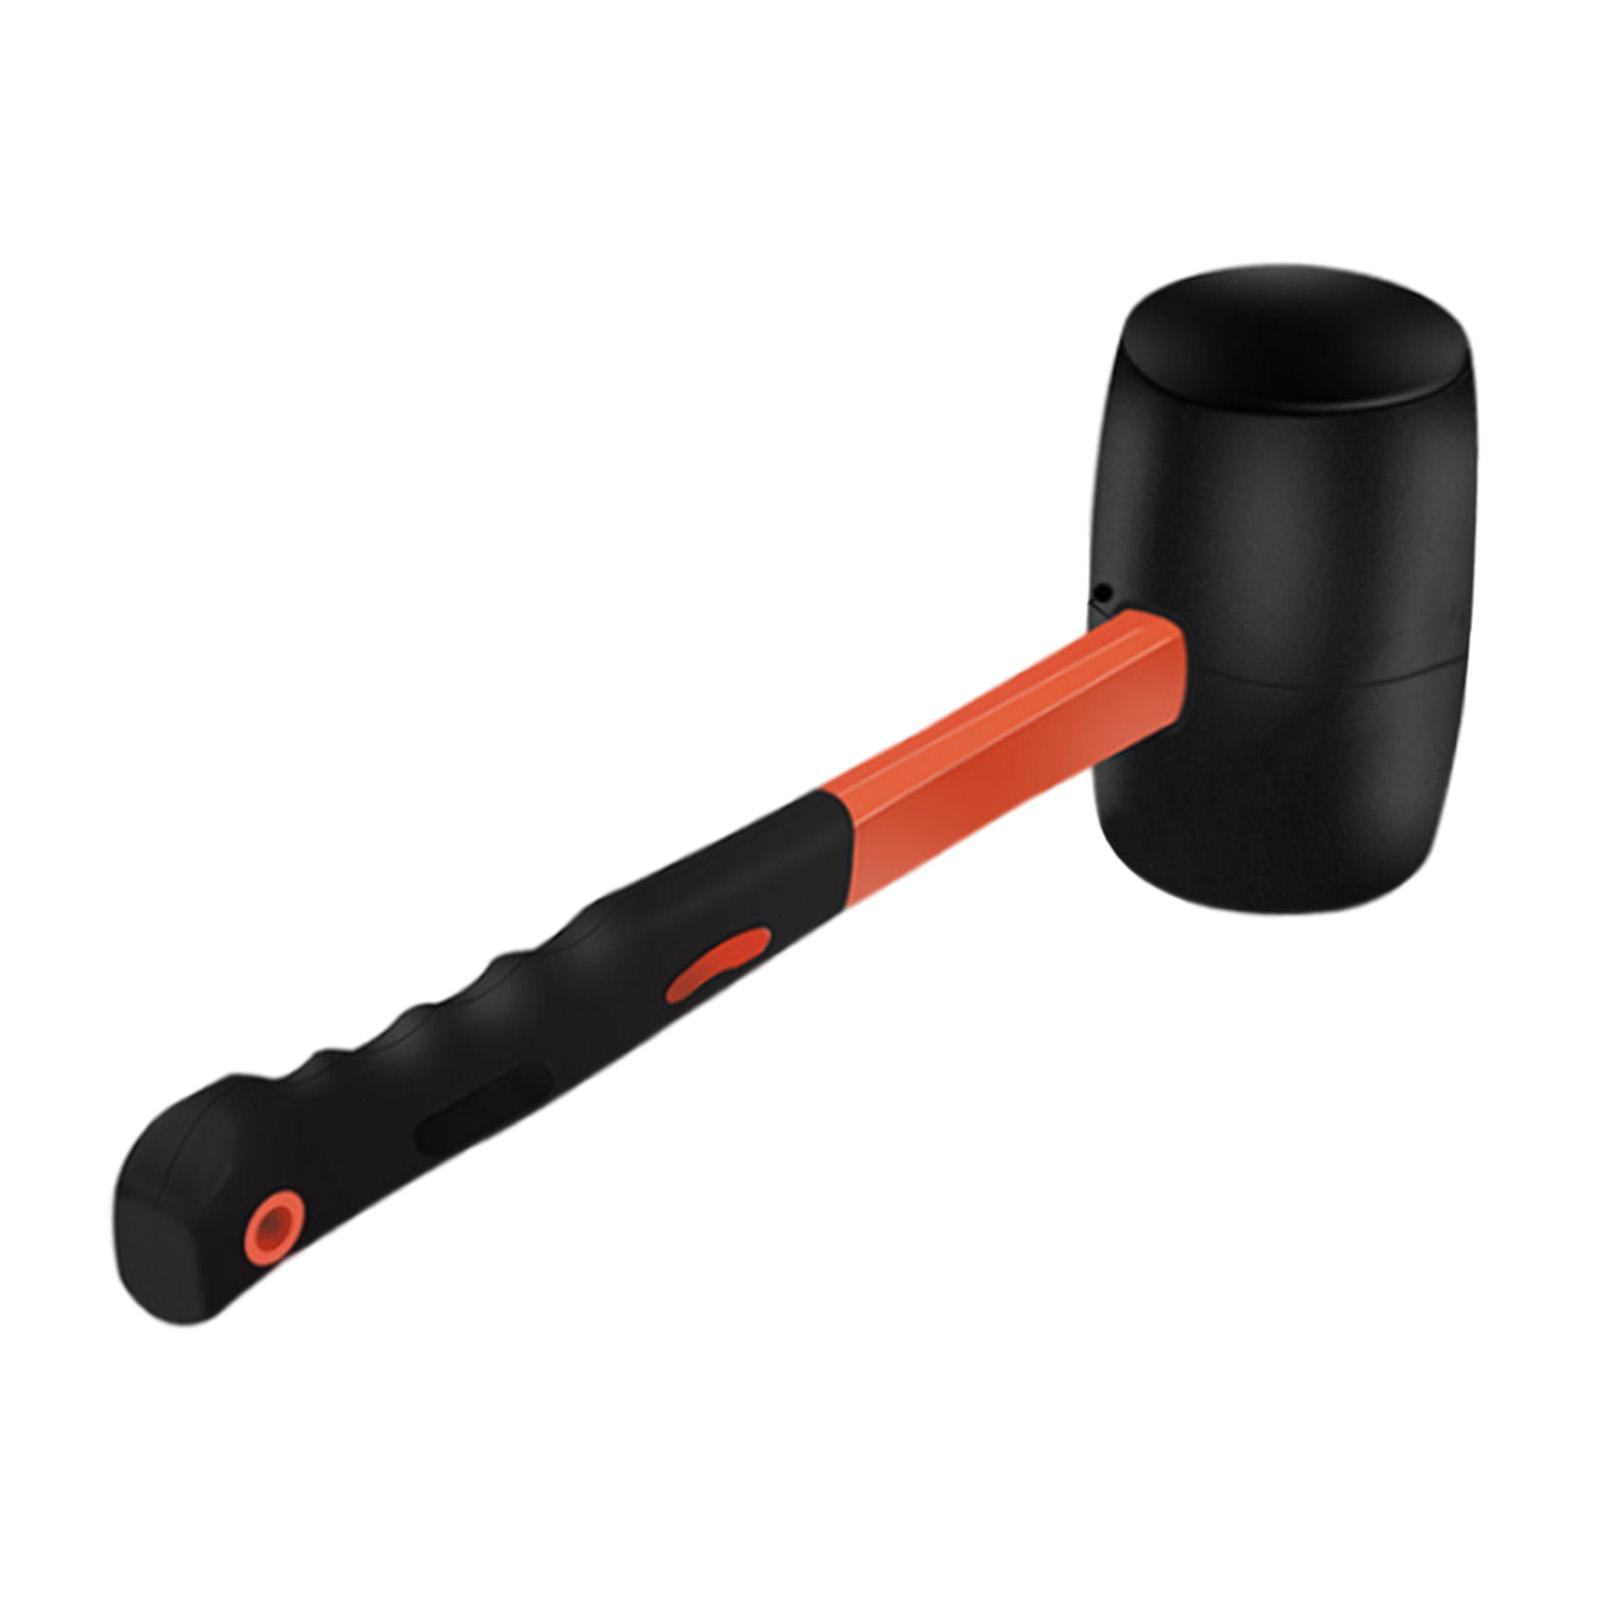 HOUSERAN Rubber Mallet, Small Rubber Mallet, Small Hammer, Nylon Hammer,  Rubber Mallet Hammer for Vinyl Flooring, Tile, Crafts, Jewelry Making